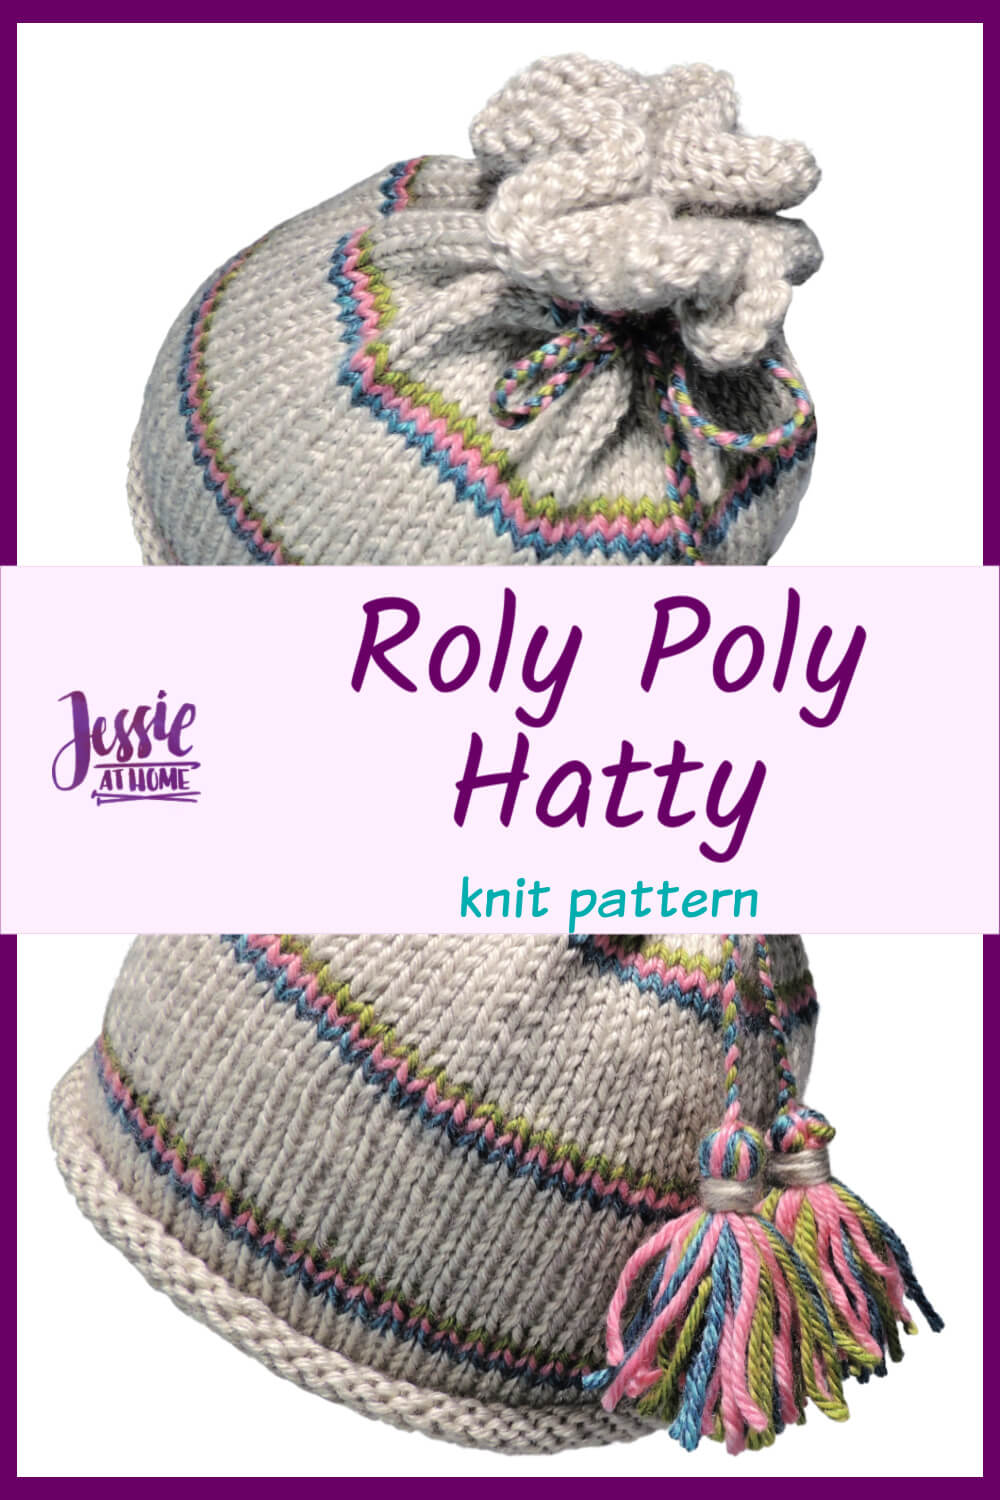 Rolled Brim Knit Hat - Roly Poly Hatty